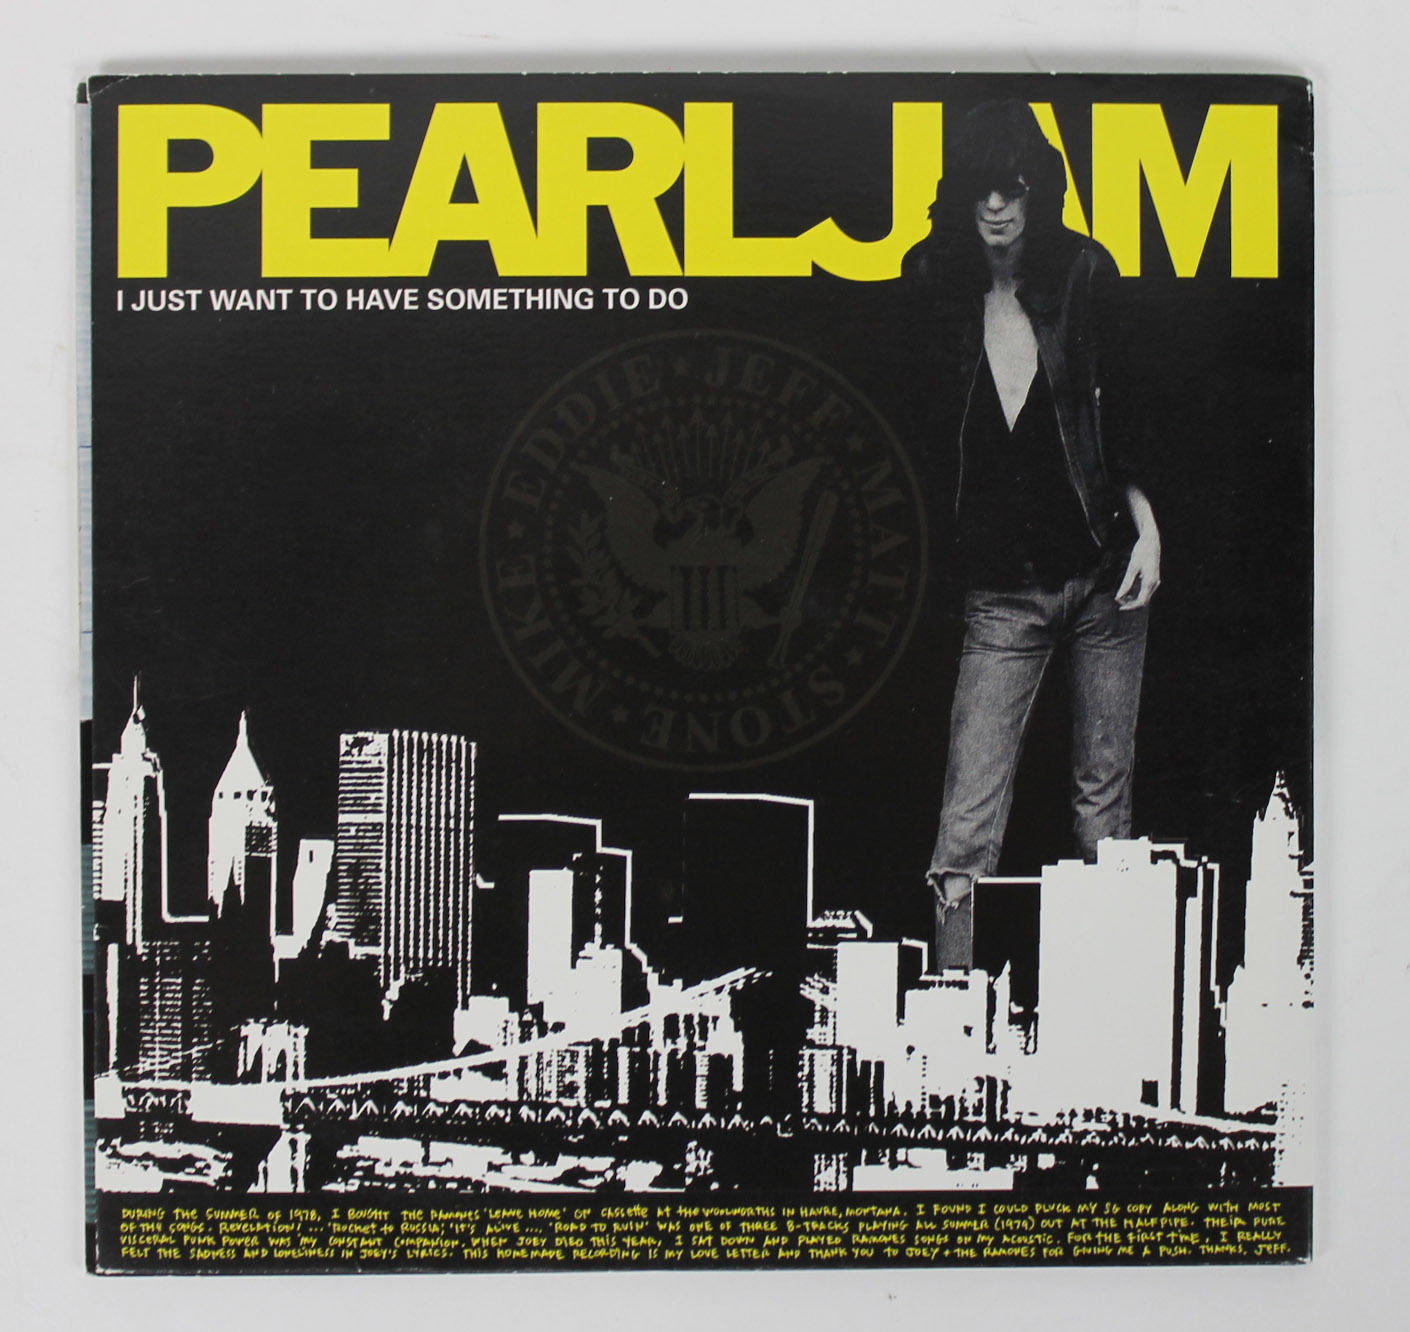 number of pearl jam albums